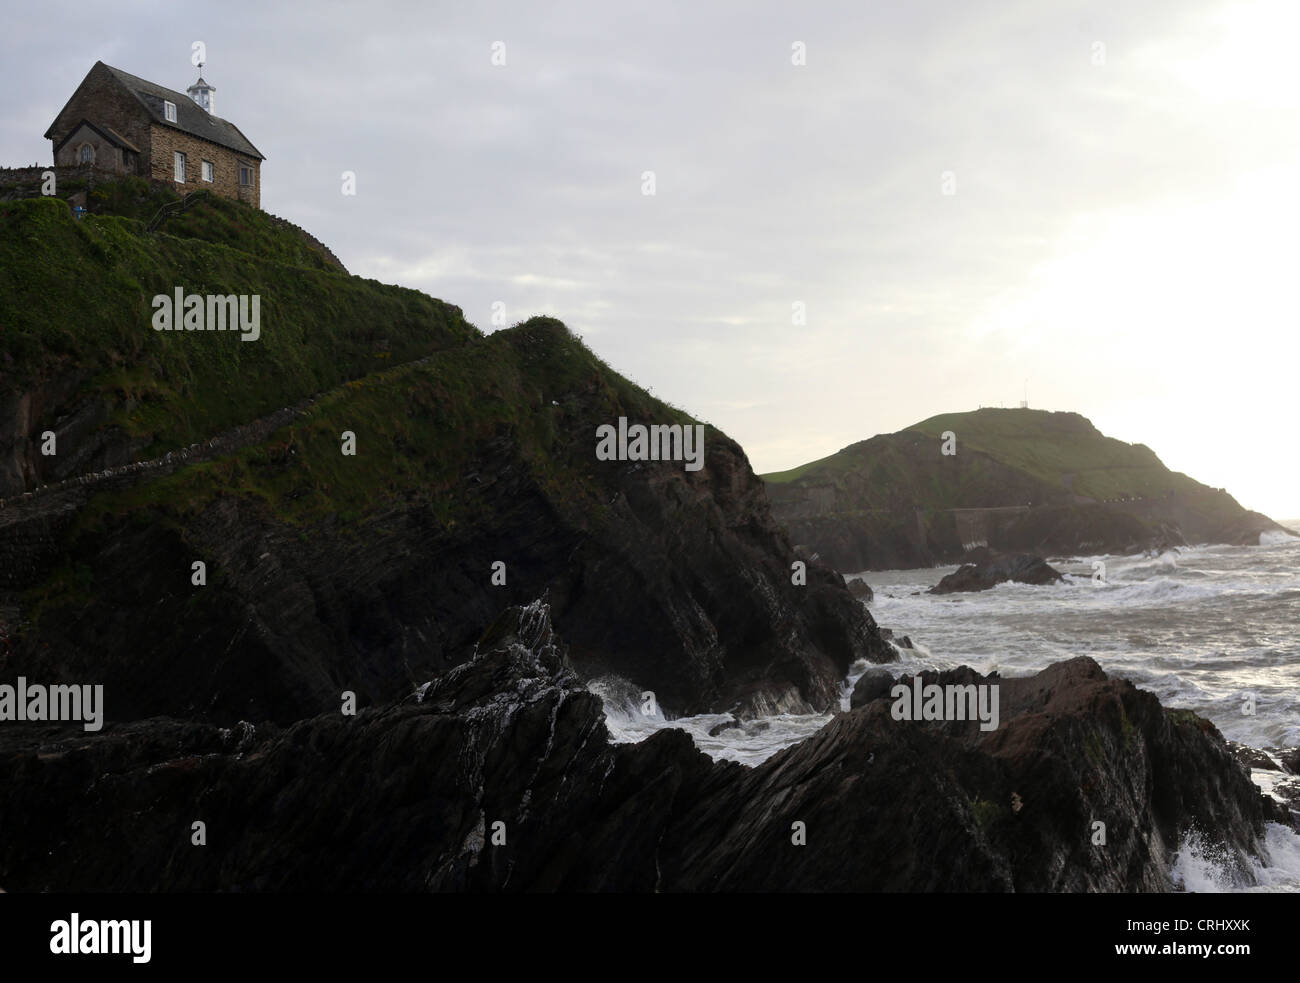 General view of the St Nicholas Chapel on Lantern Hill pictured in Ilfracombe Harbour in Devon, United Kingdom, June 8th, 2012. Stock Photo